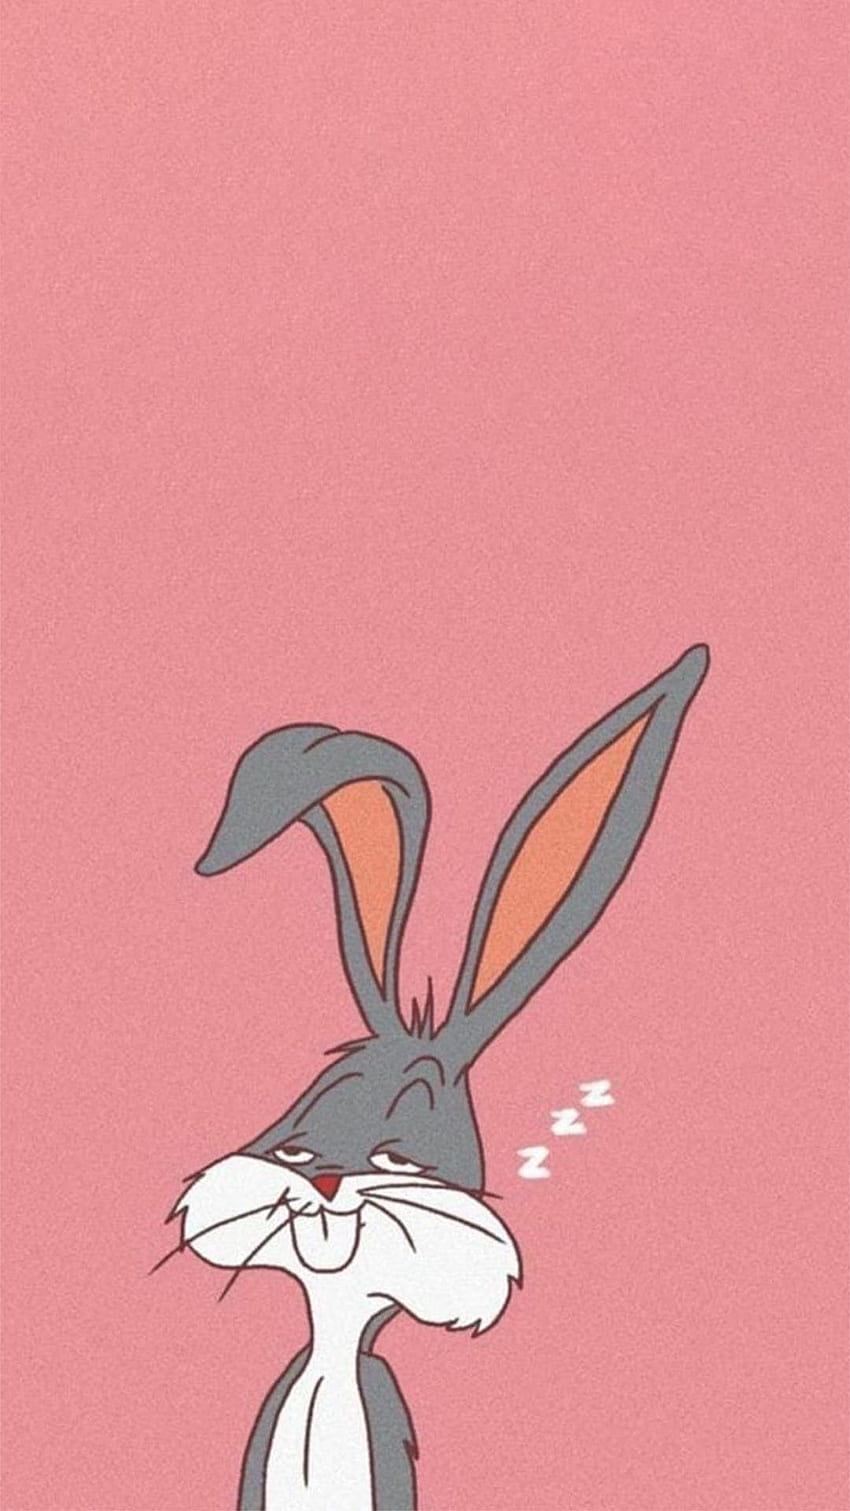 Aggregate 76+ bugs bunny wallpaper latest - in.cdgdbentre